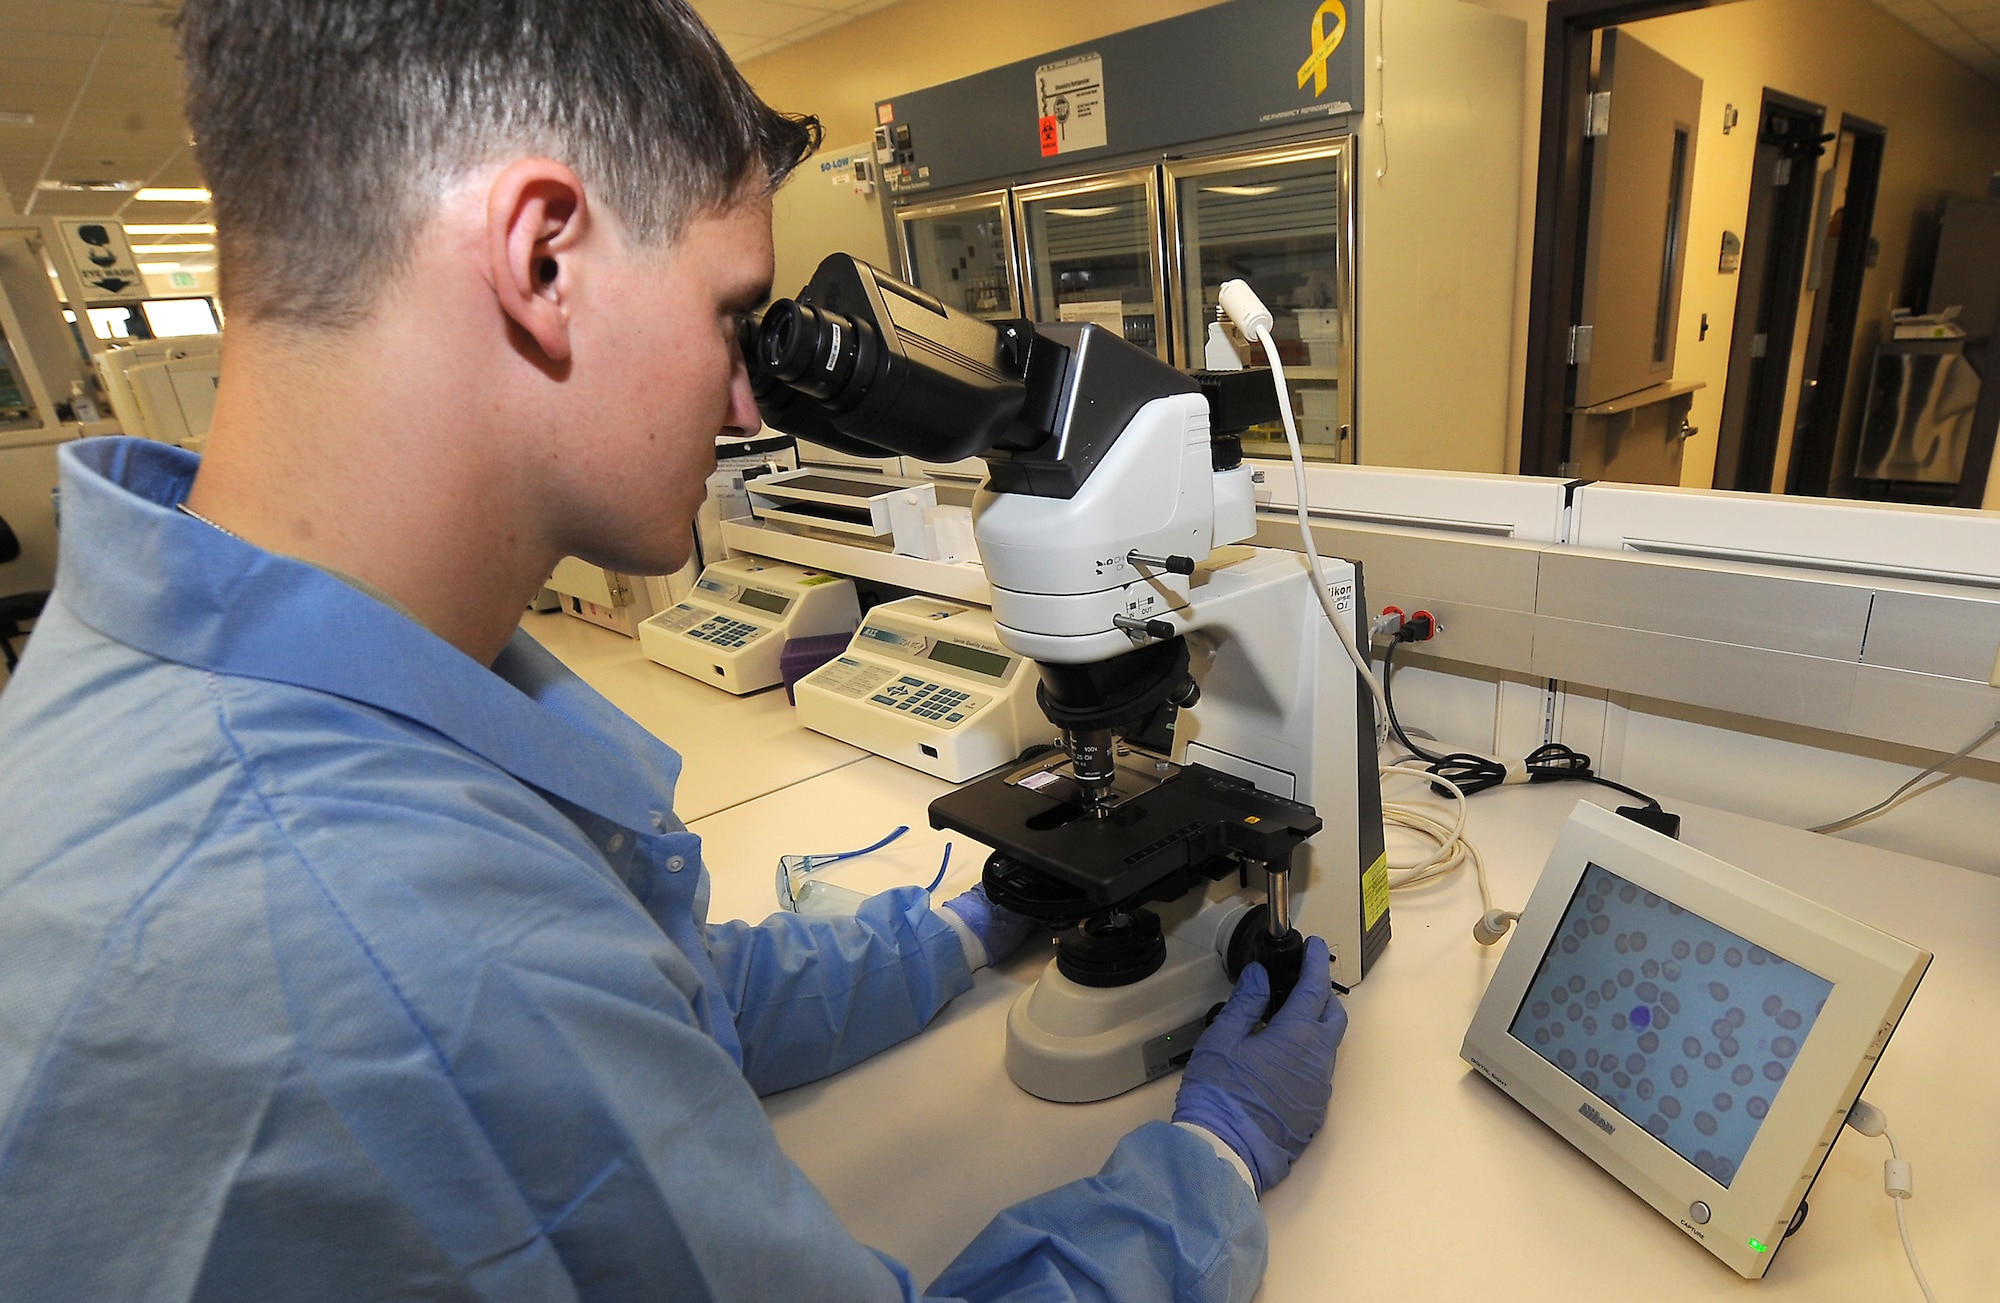 Airman 1st Class Timothy Rybinski, lab technician, manually reviews white blood cells for abnormalities Oct. 14 on the new state of the art microscopes at the David Grant USAF Medical Center laboratory. (U.S. Air Force photo/ Staff Sgt. Liliana Moreno)